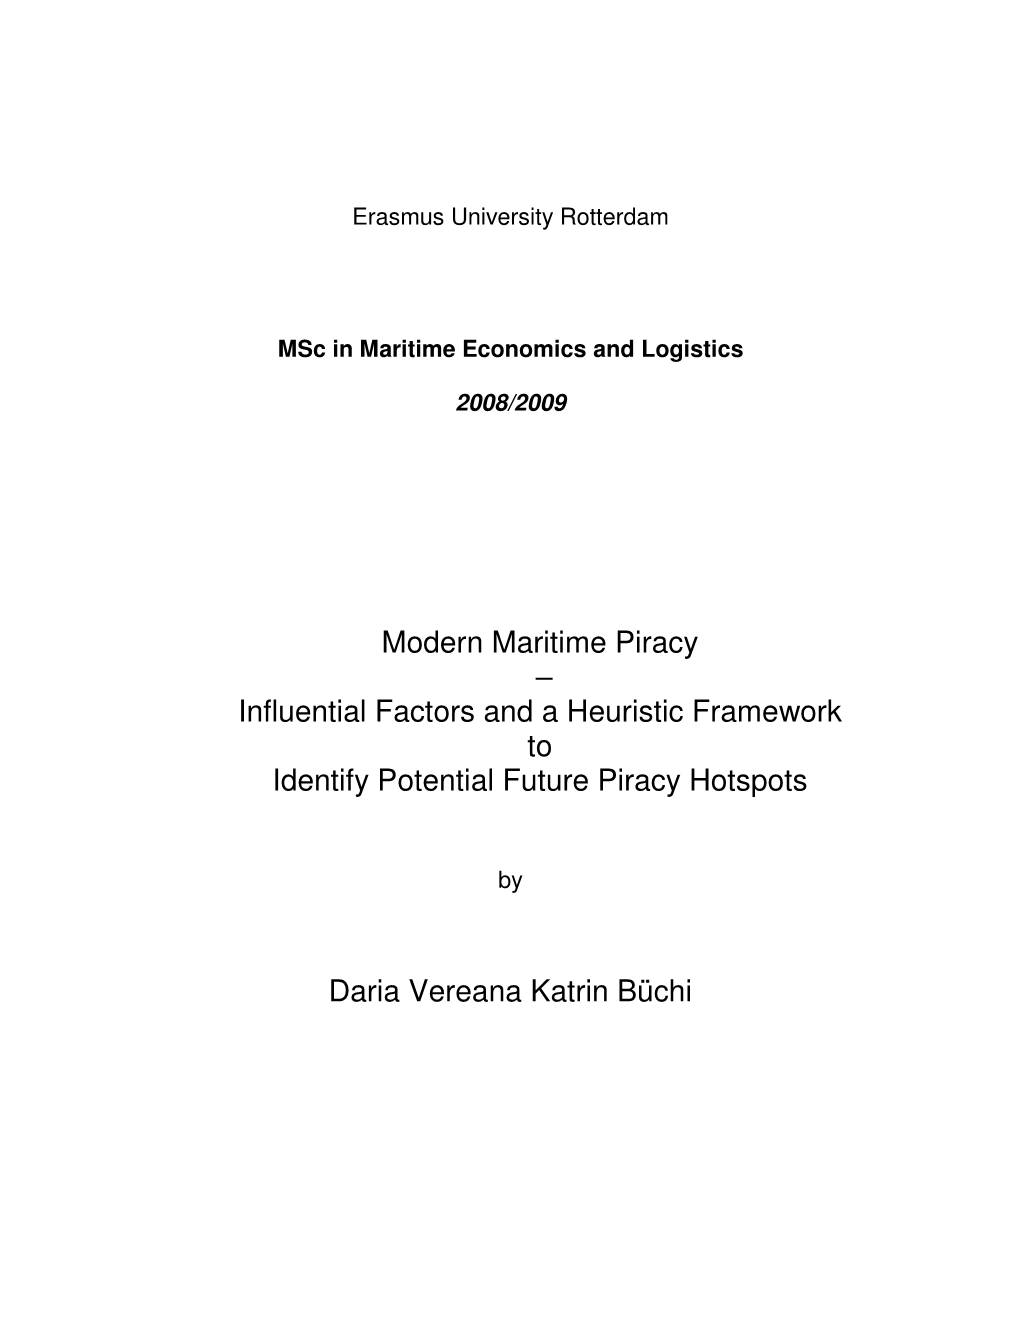 Modern Maritime Piracy – Influential Factors and a Heuristic Framework to Identify Potential Future Piracy Hotspots